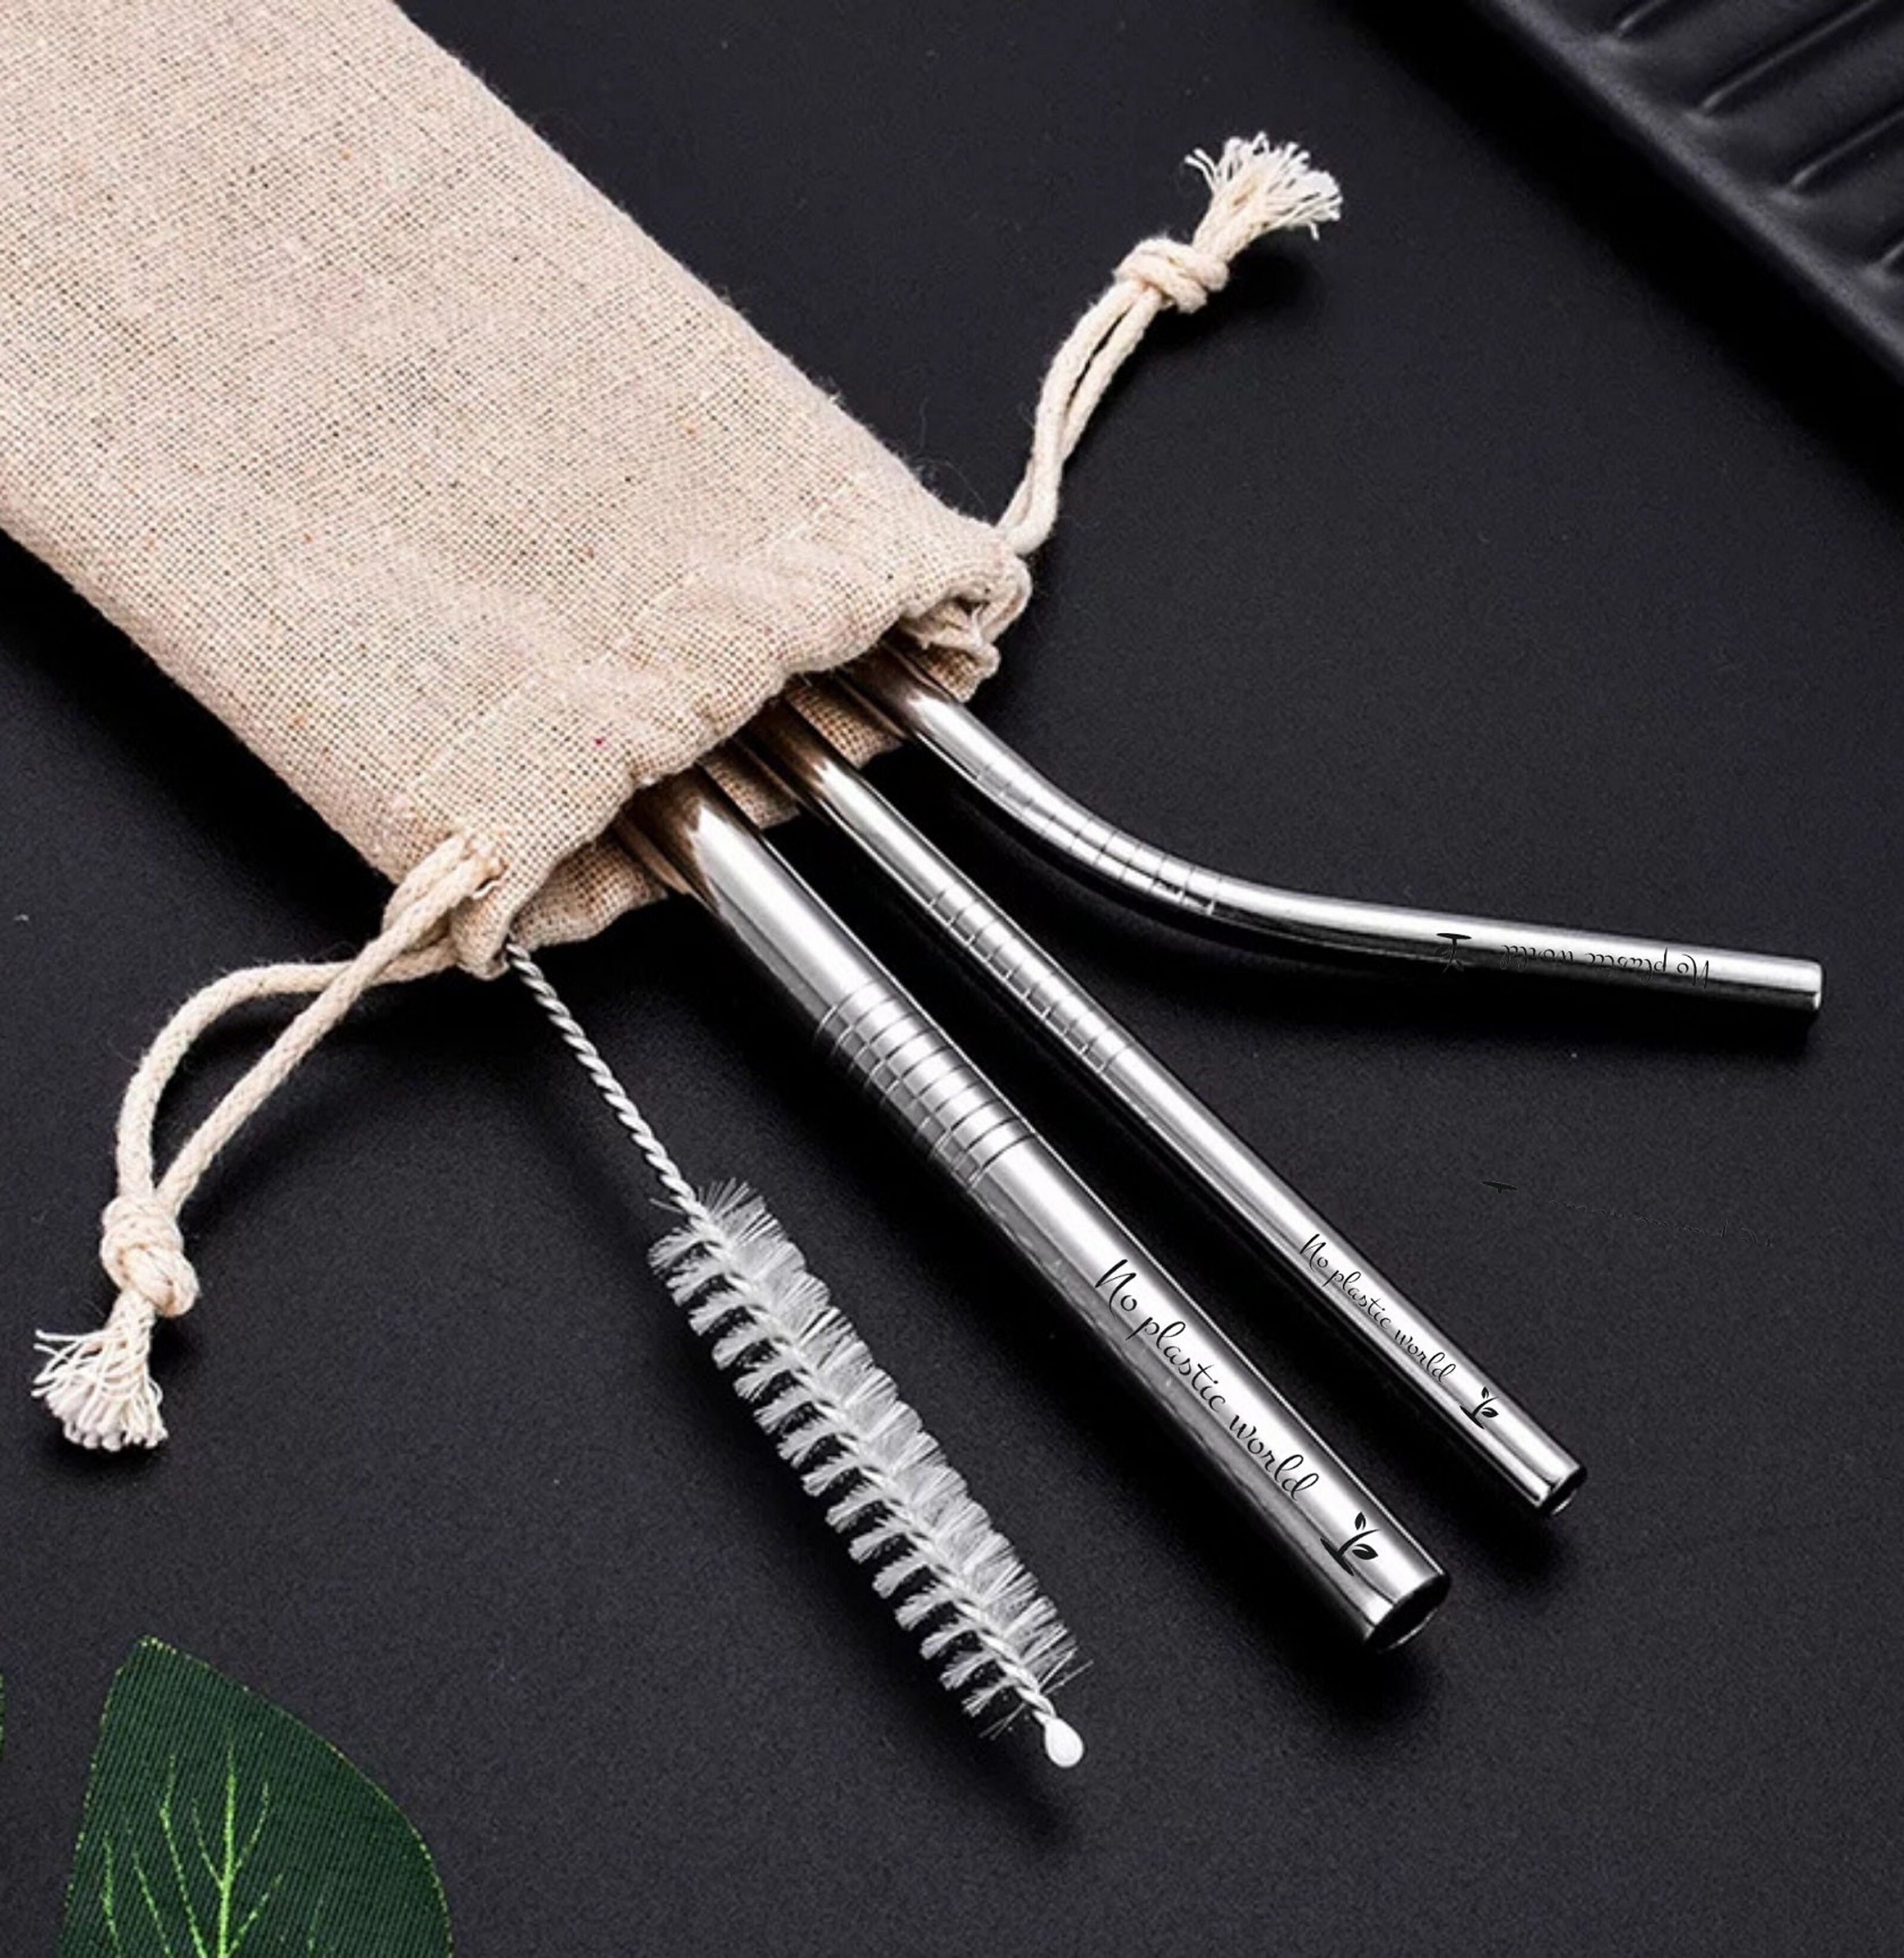 20 Pcs Straw Brush Bendable Cleaning Detergent Stainless Cleaner Steel  Straws